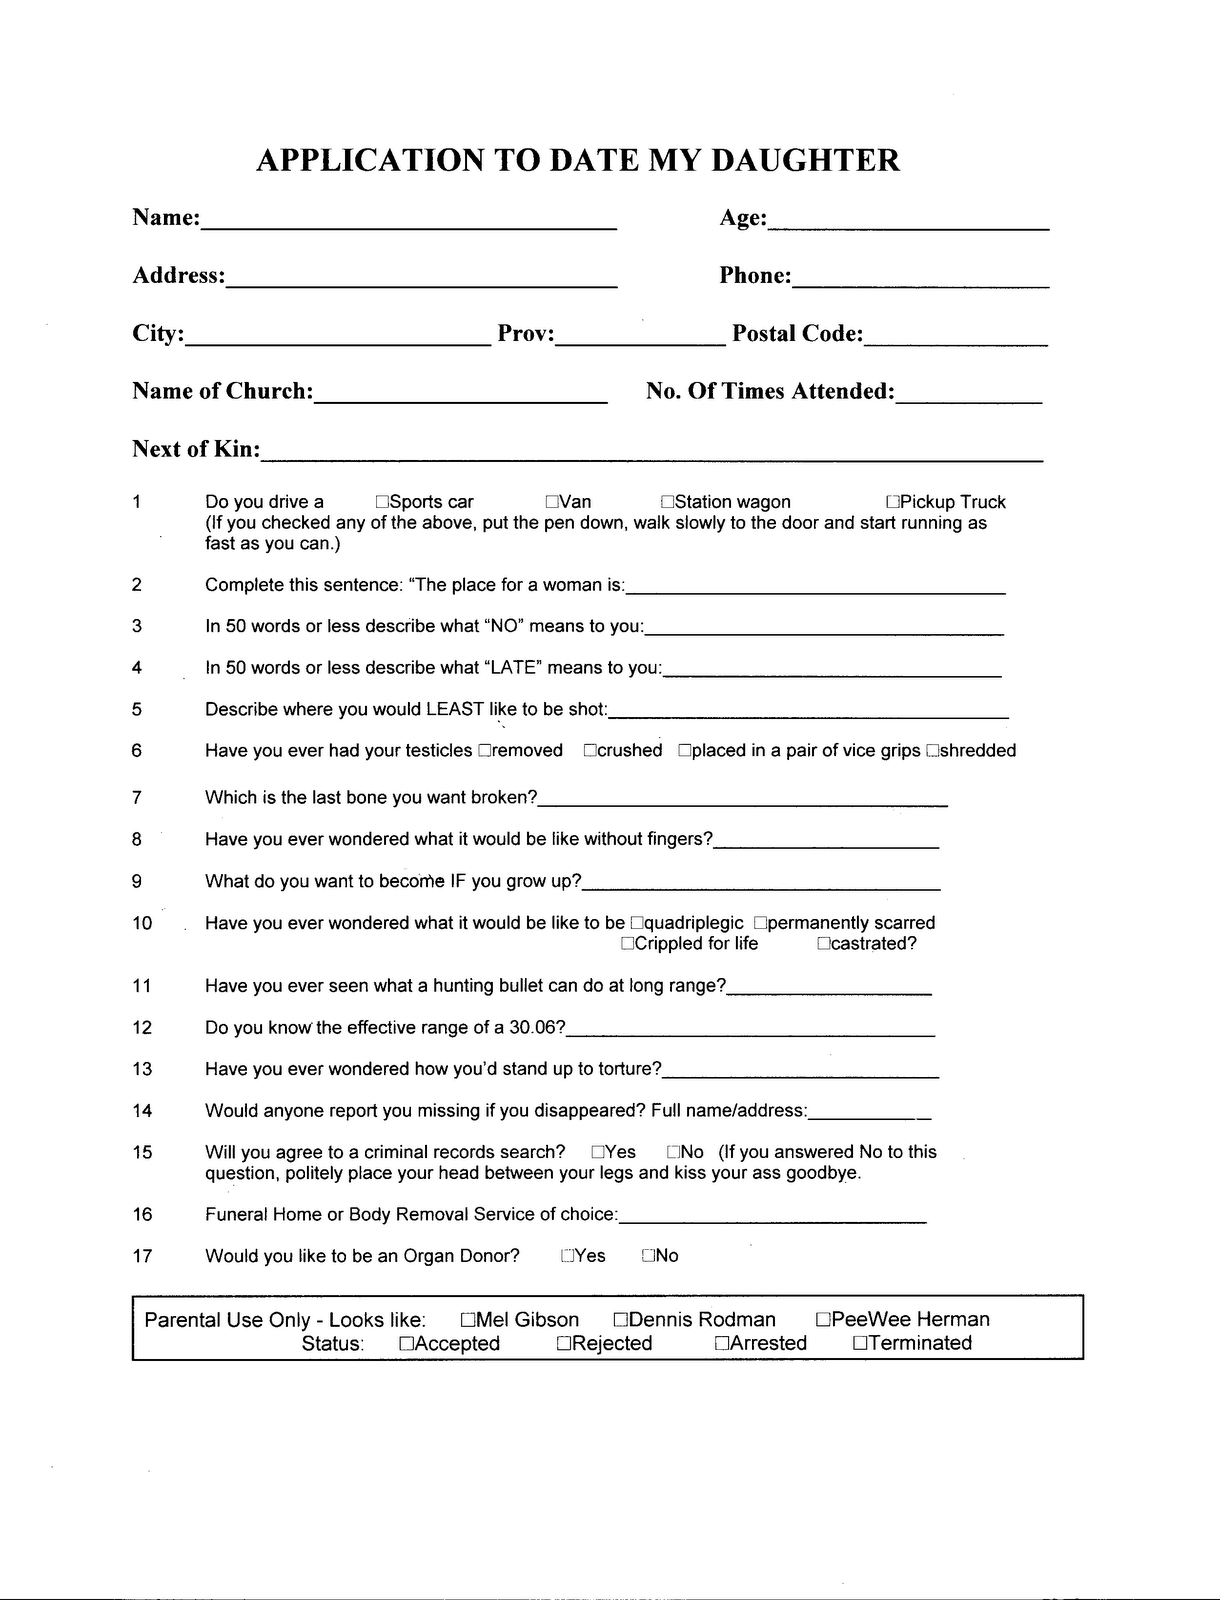 Dating application